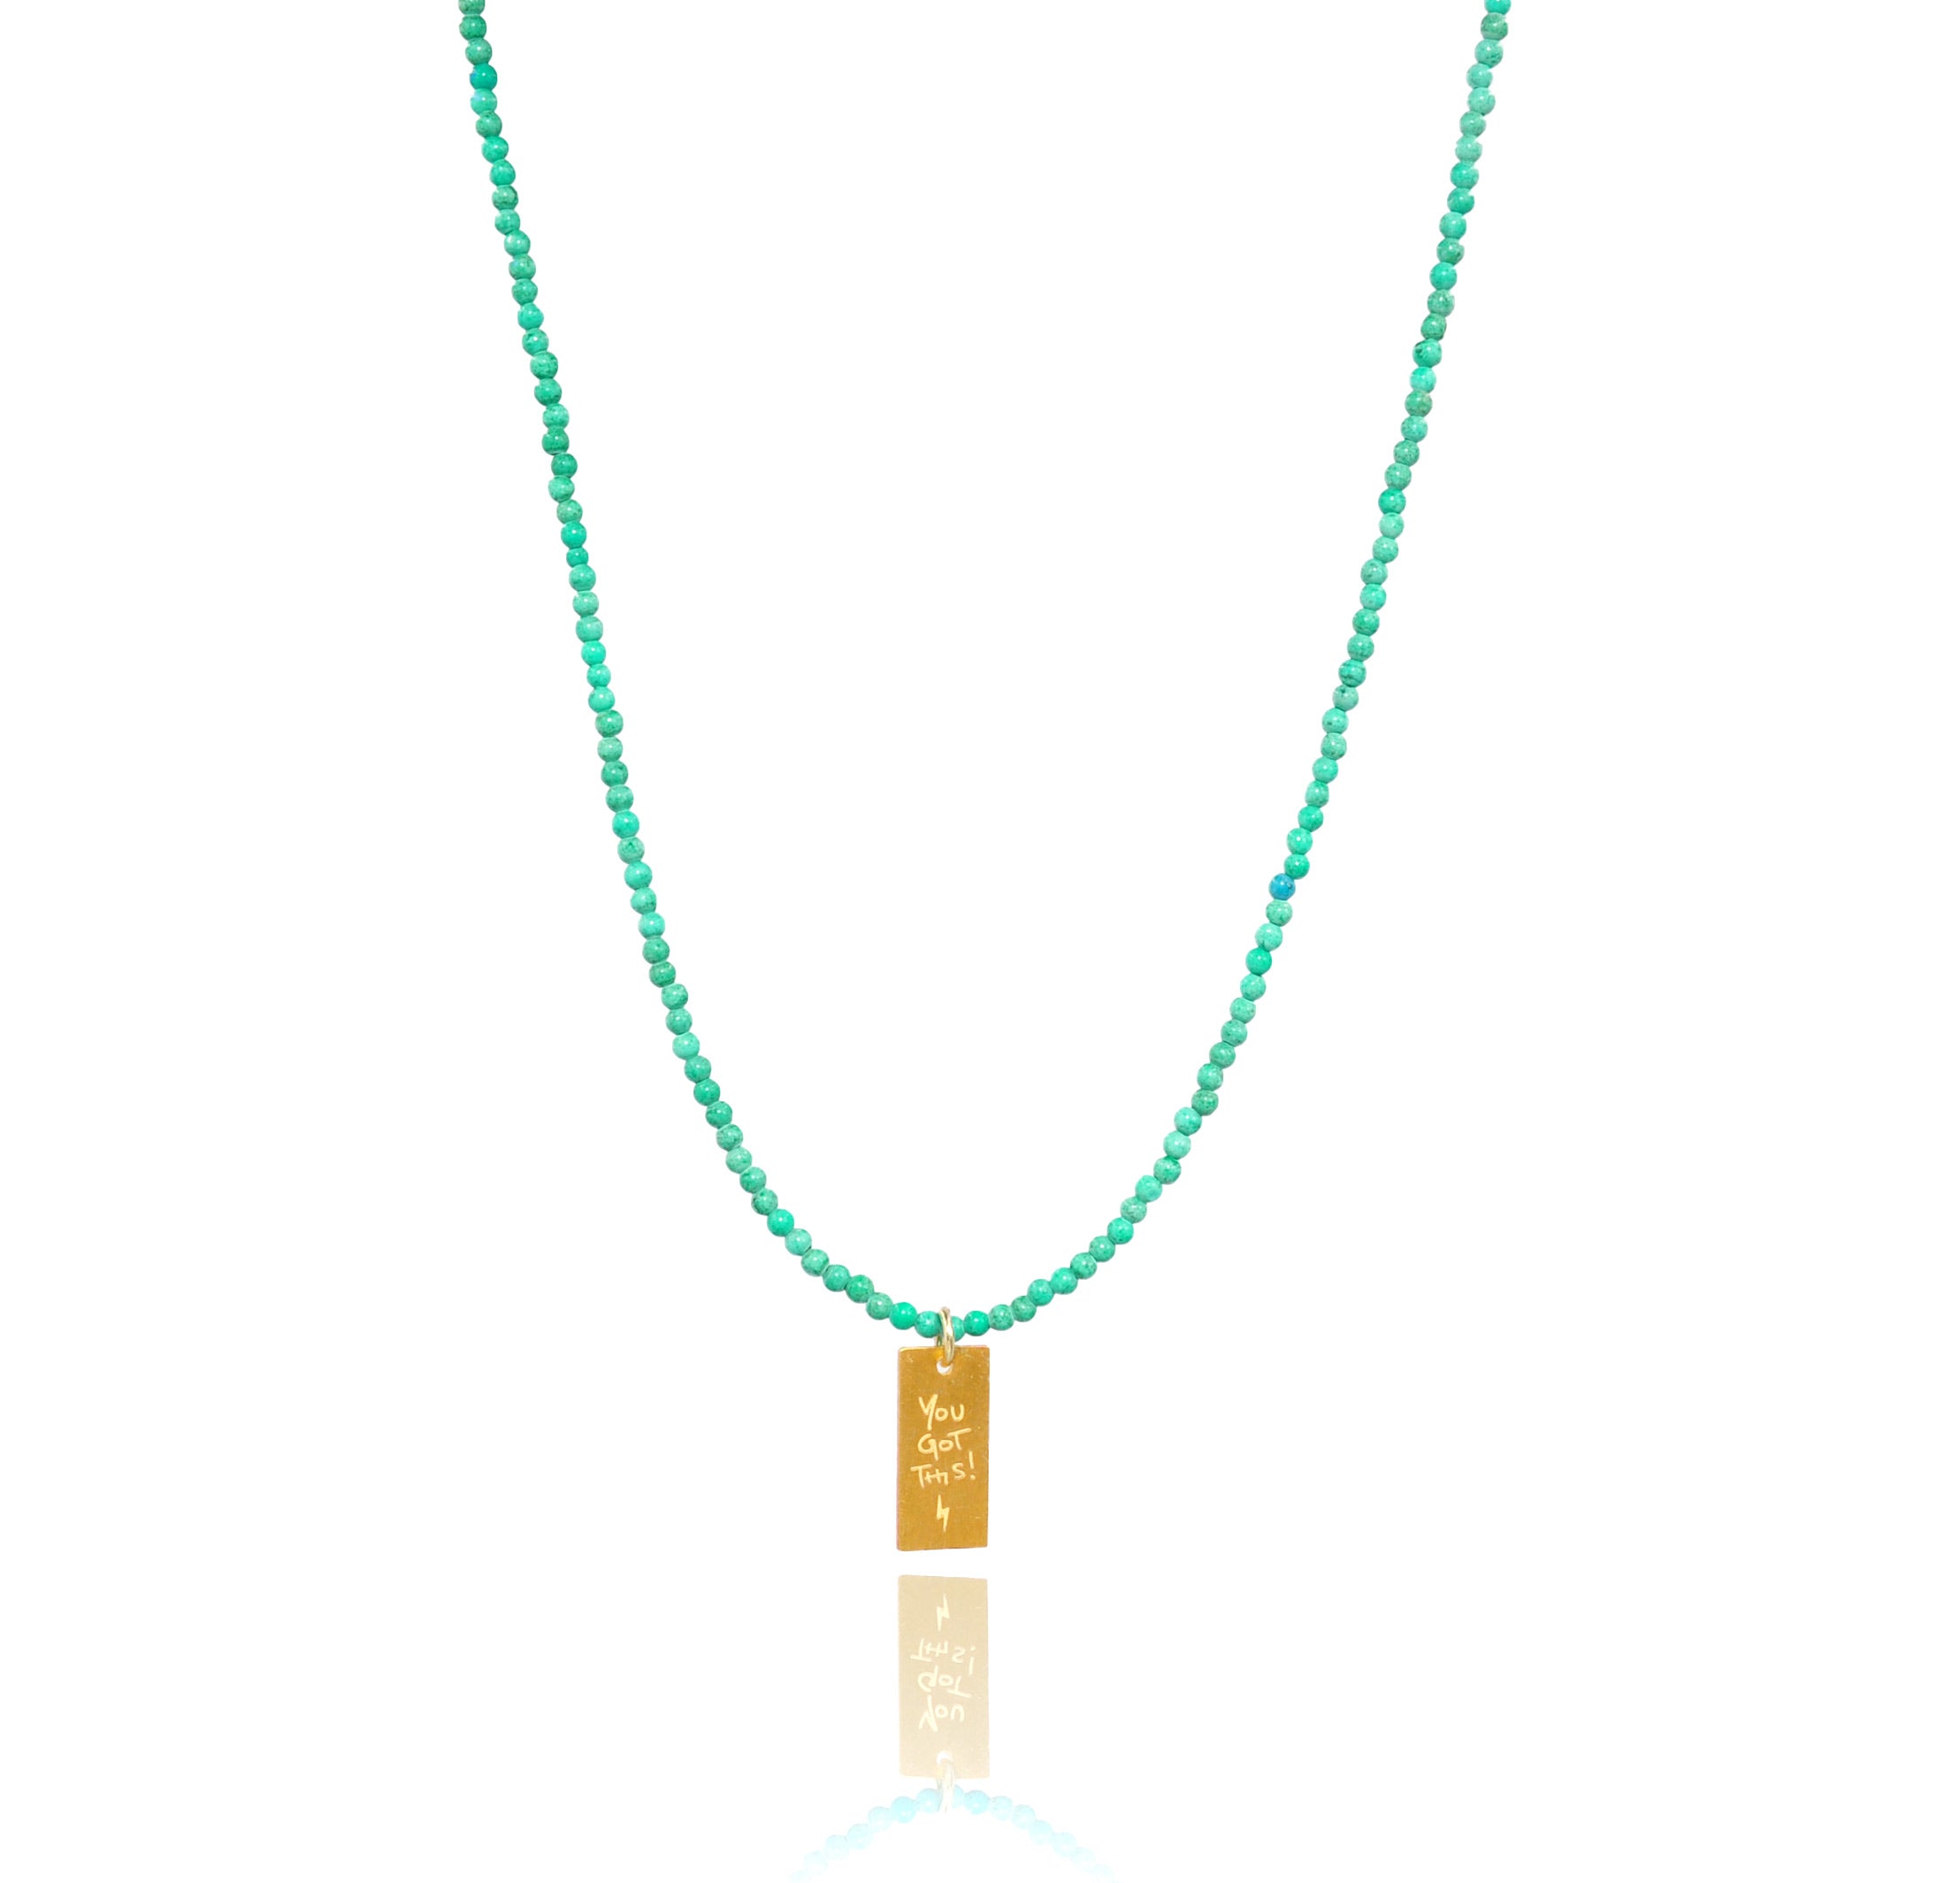 Turquoise 'You got this' Necklace